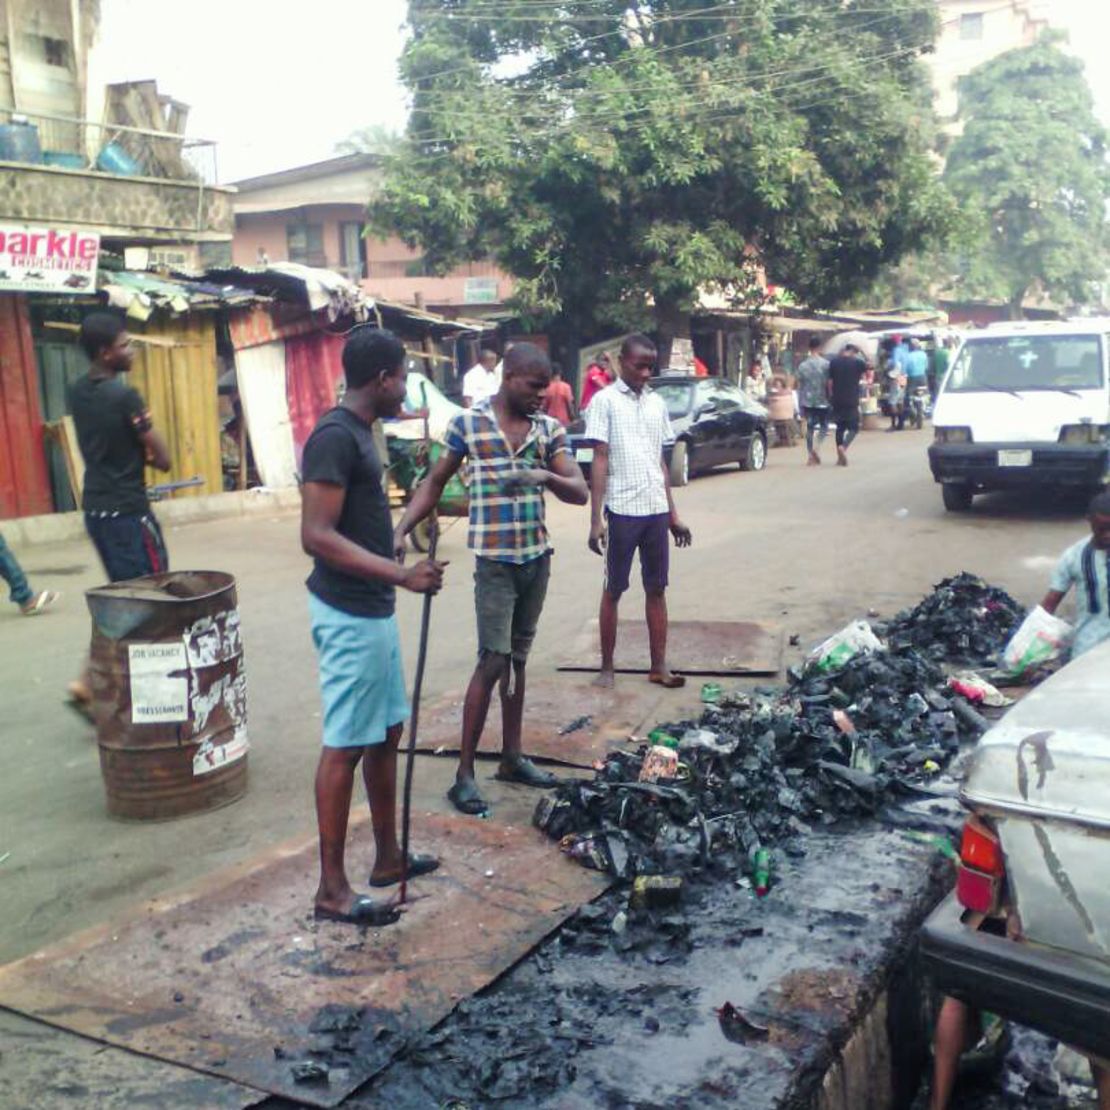 Anaekwe hopes to increase people's awarenesss about the dangers of trash. 